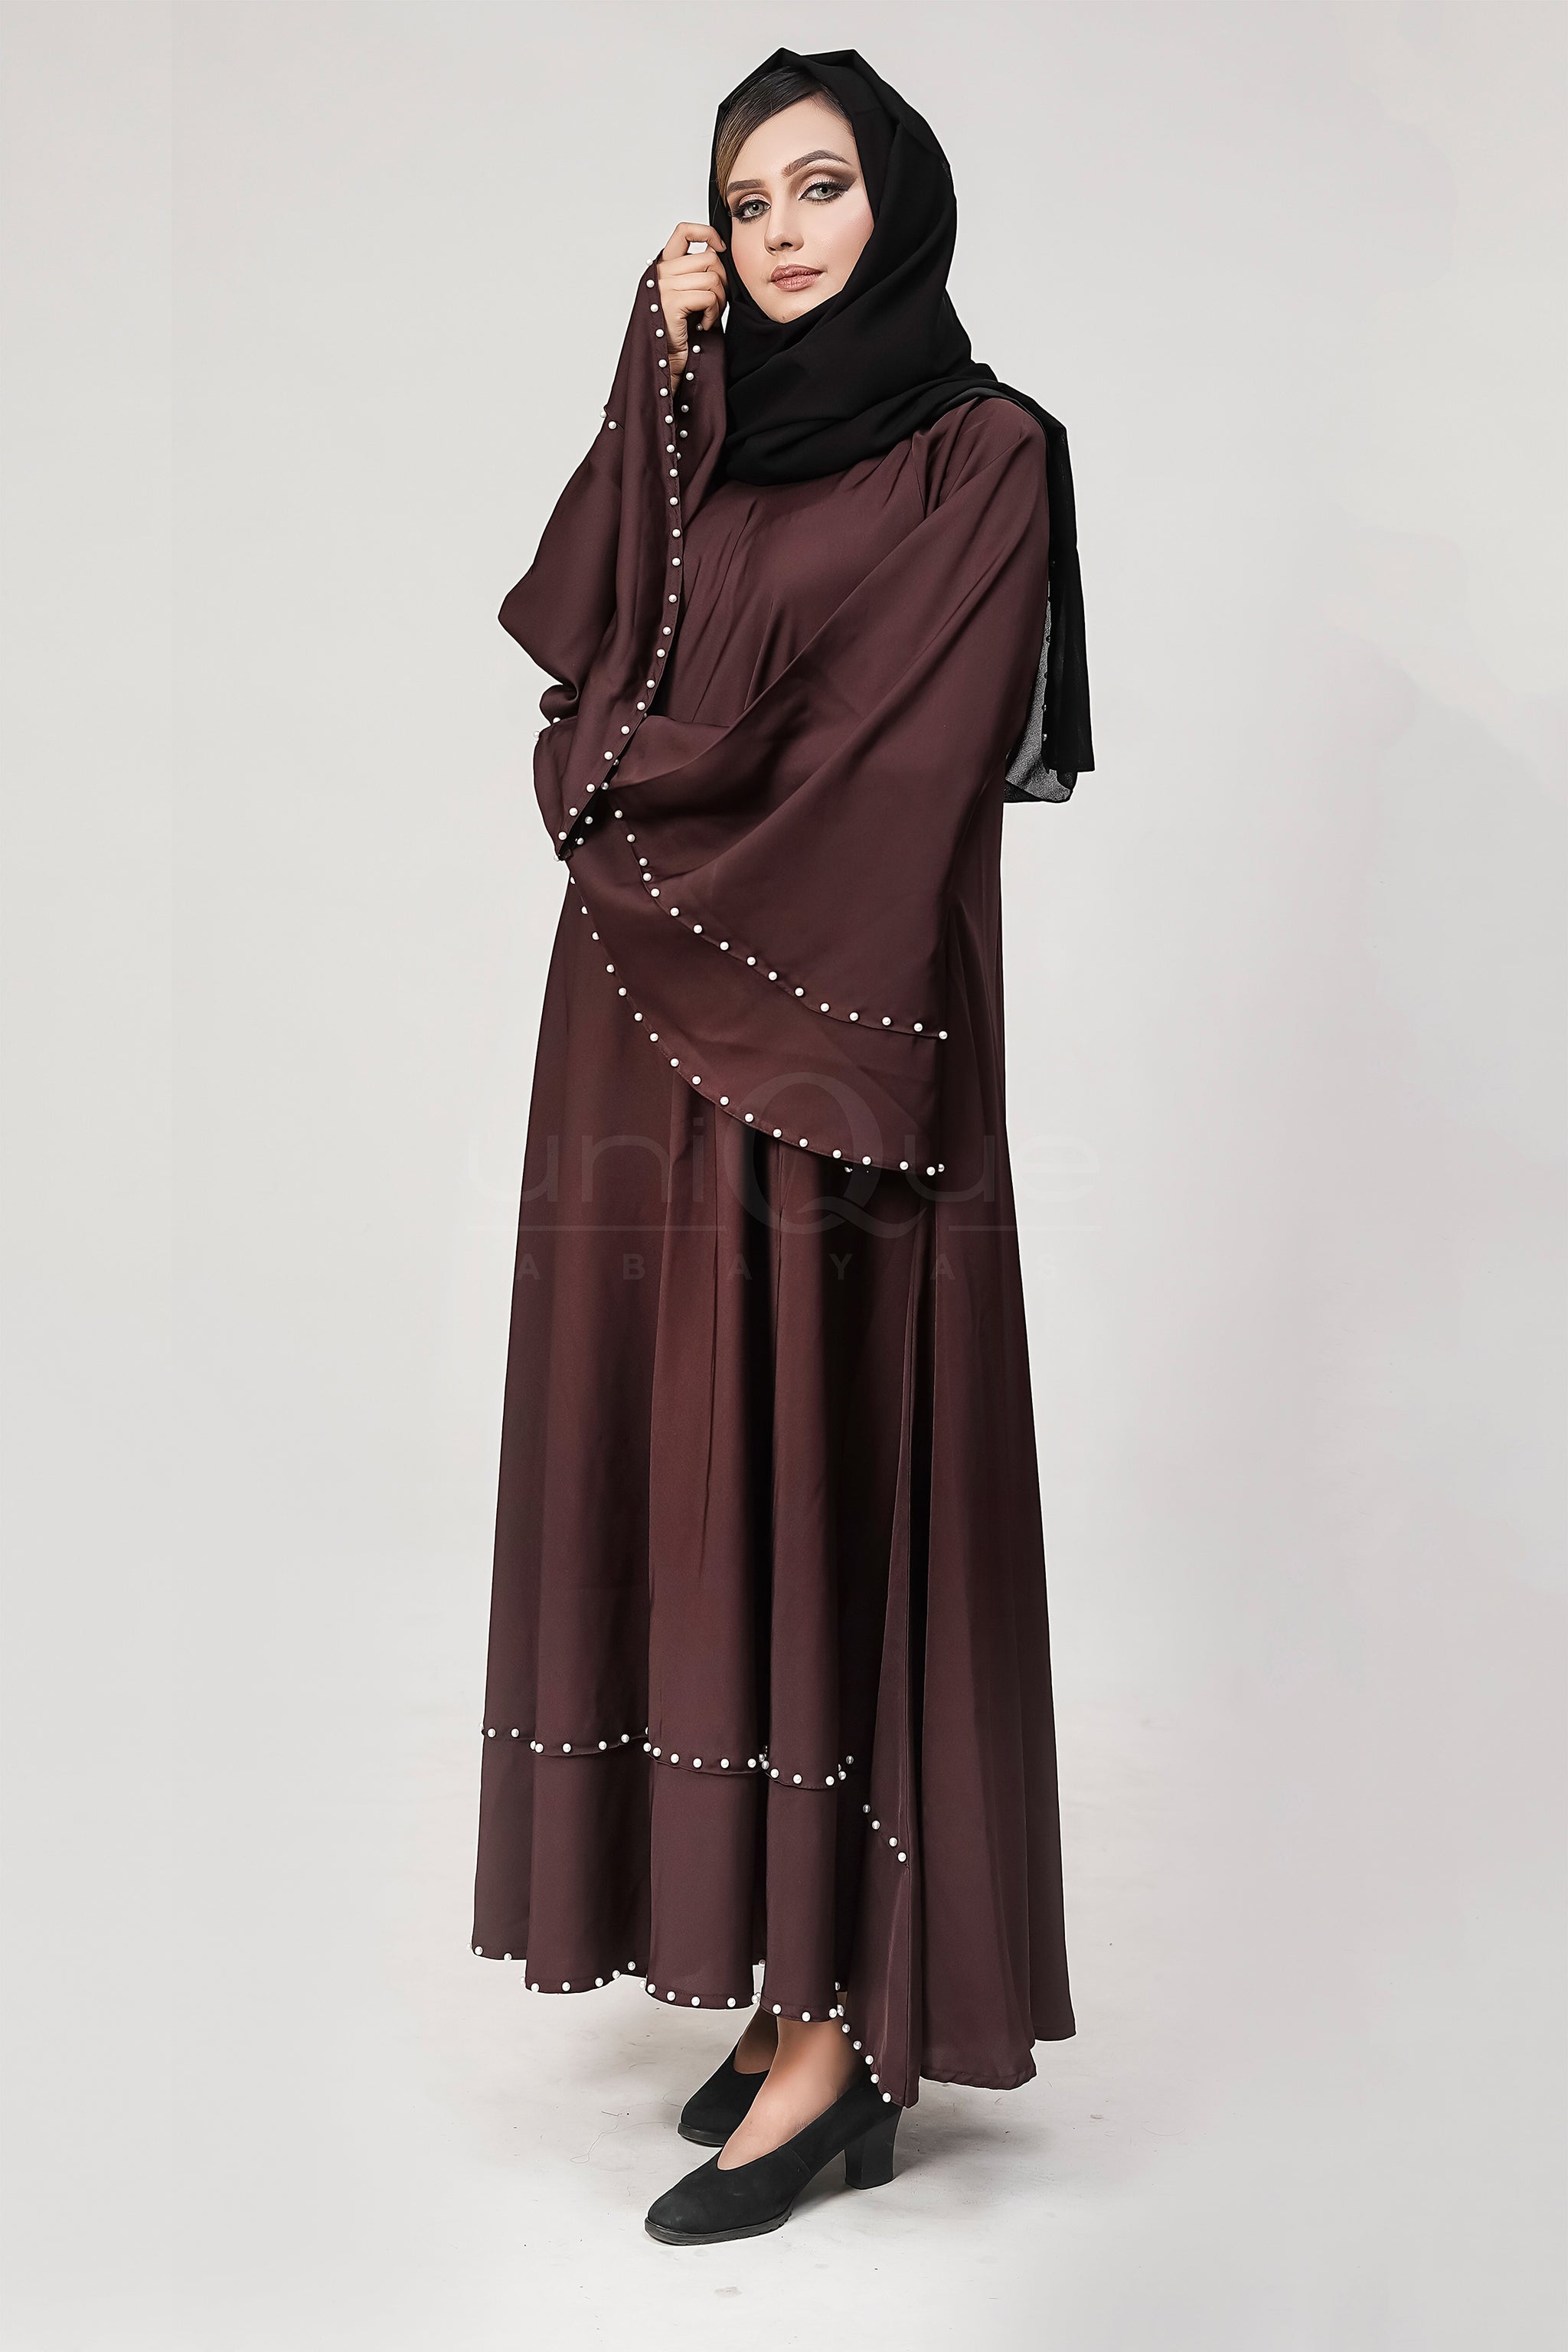 Pearl Umbrella Chocolate Abaya by Uniquewallart Abaya for Women, Front Side View